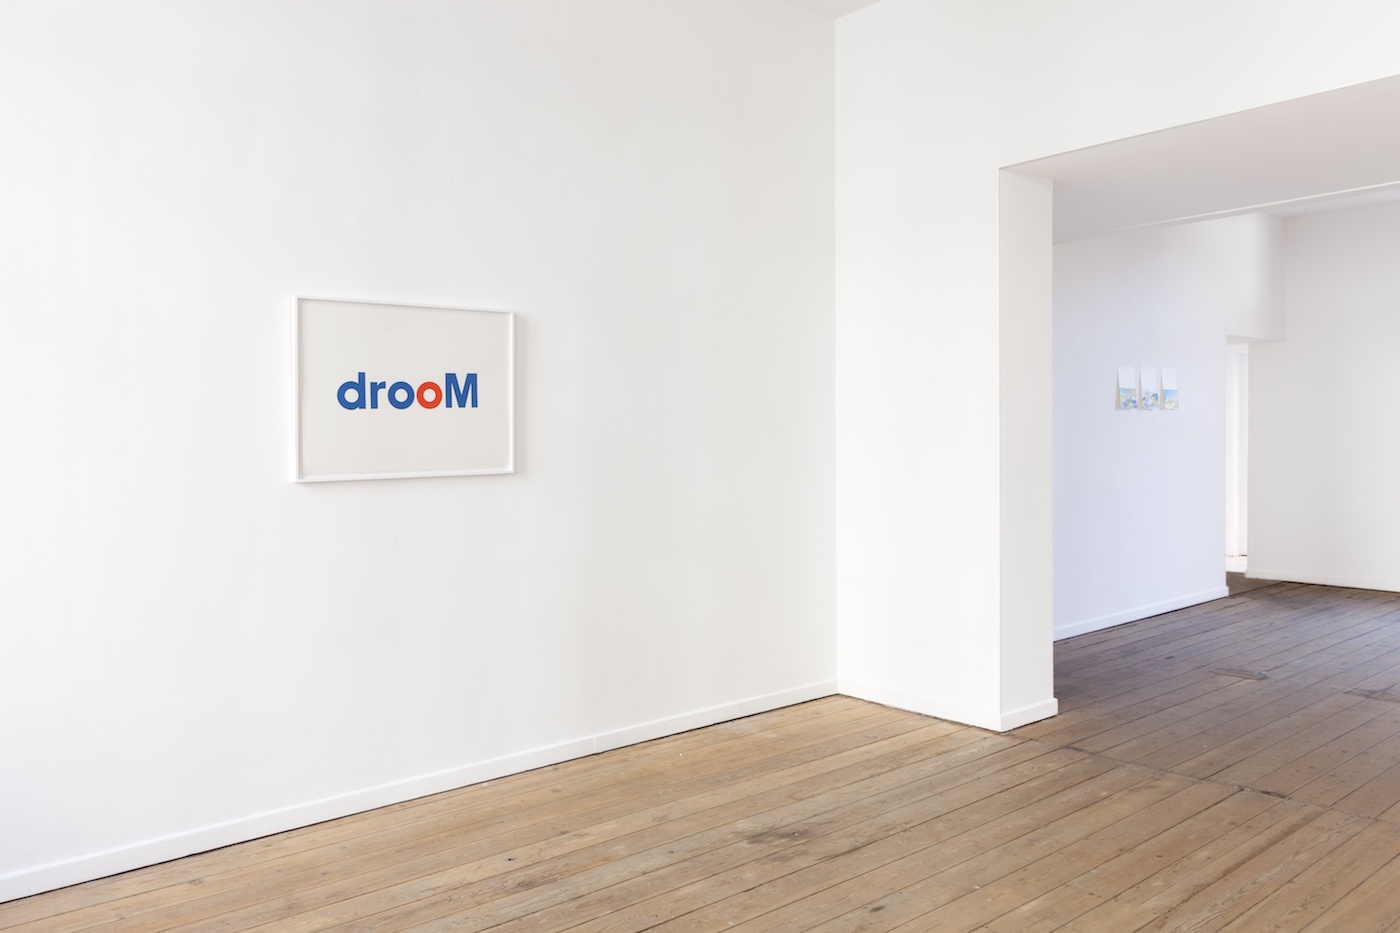 Gregory Decock, Grégory Decock, Made possible by, drooM, drooM centre d'art, Island Brussels